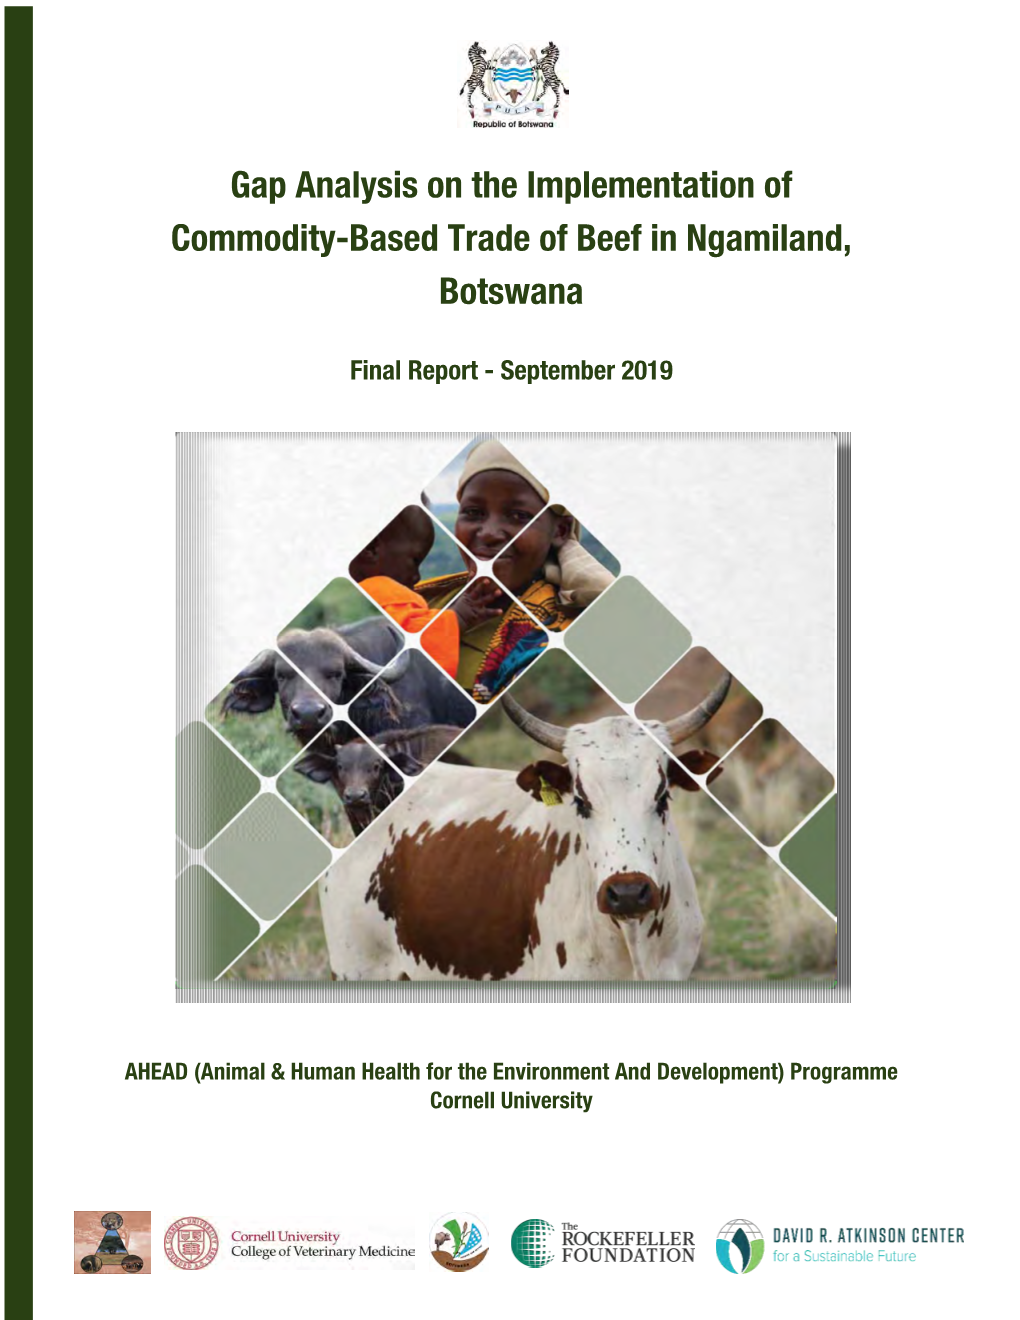 Gap Analysis on the Implementation of Commodity-Based Trade of Beef in Ngamiland, Botswana